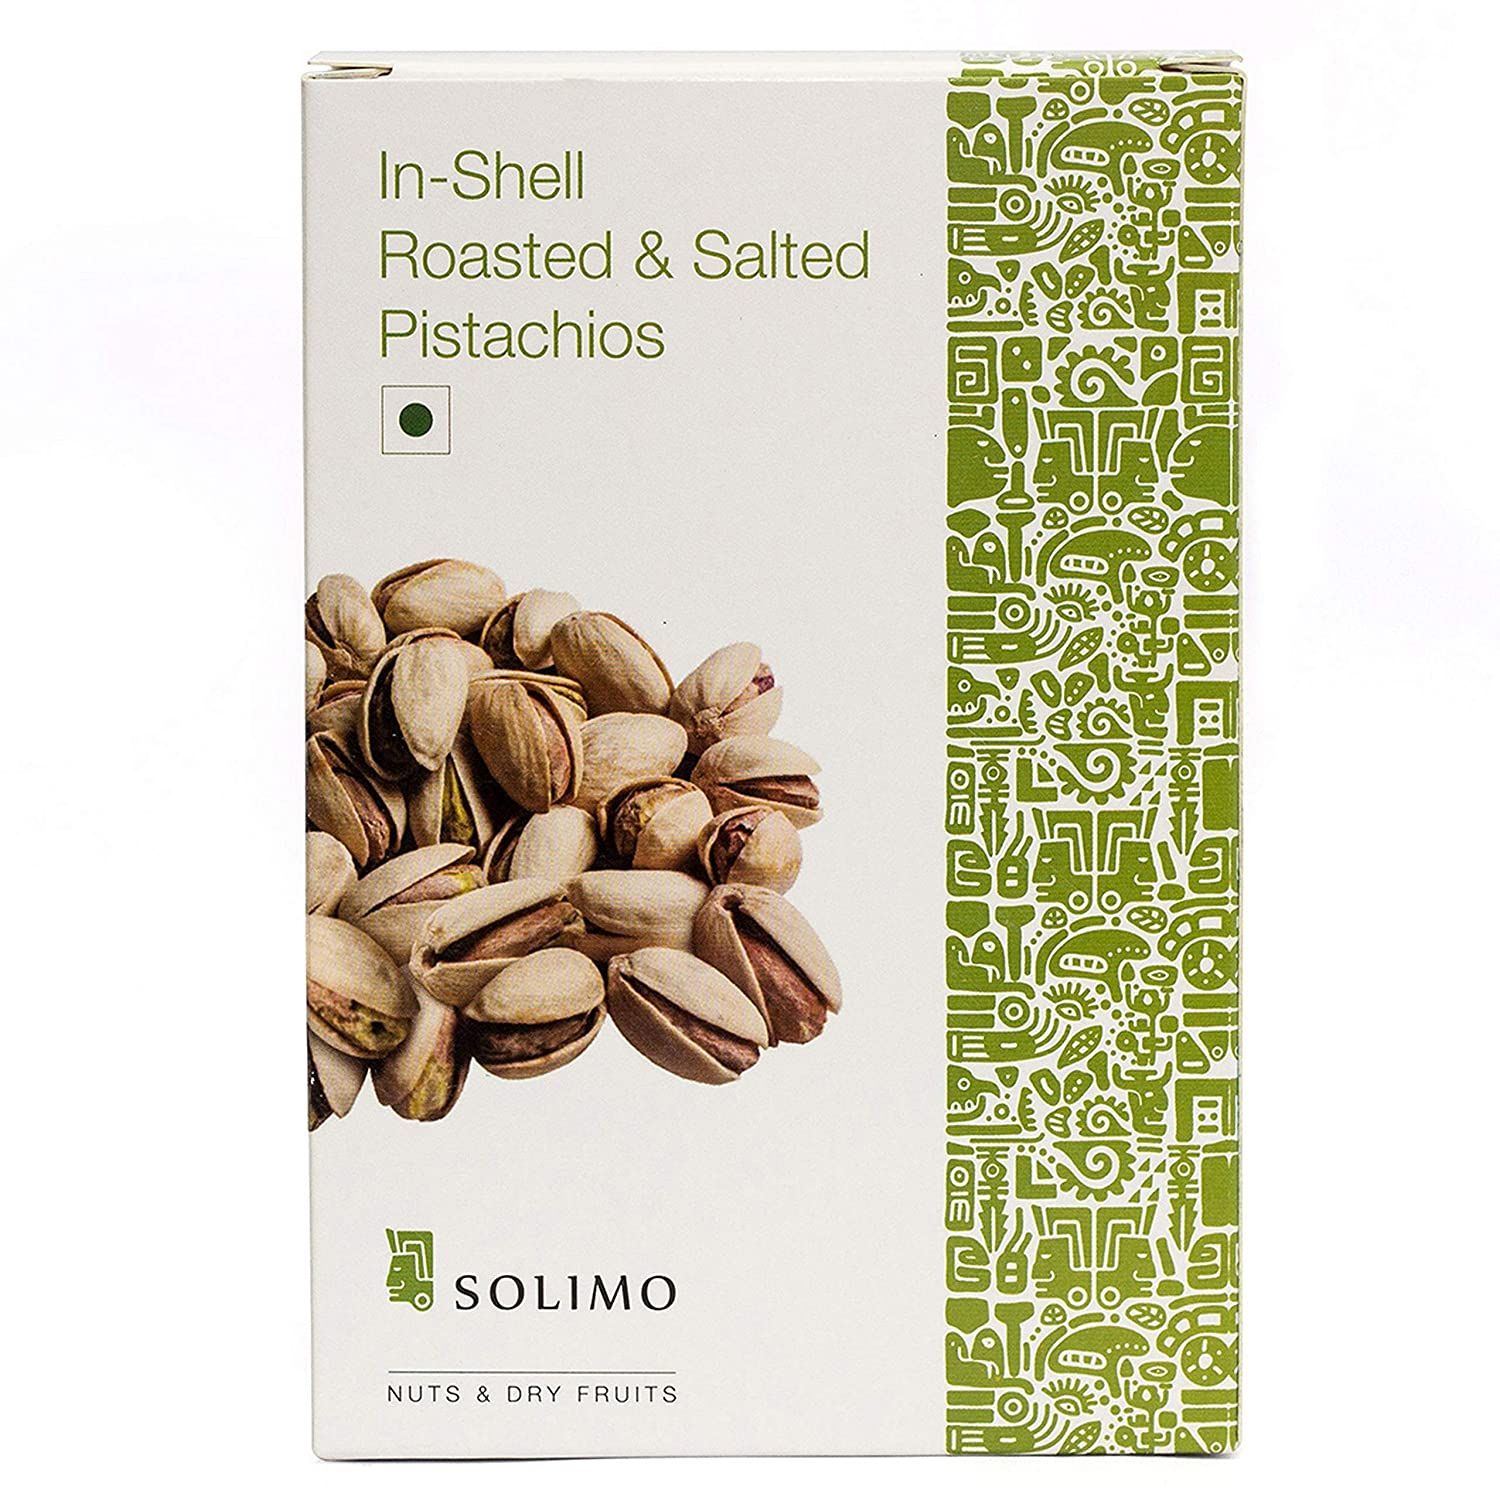 Solimo Roasted & Salted Pistchios Image